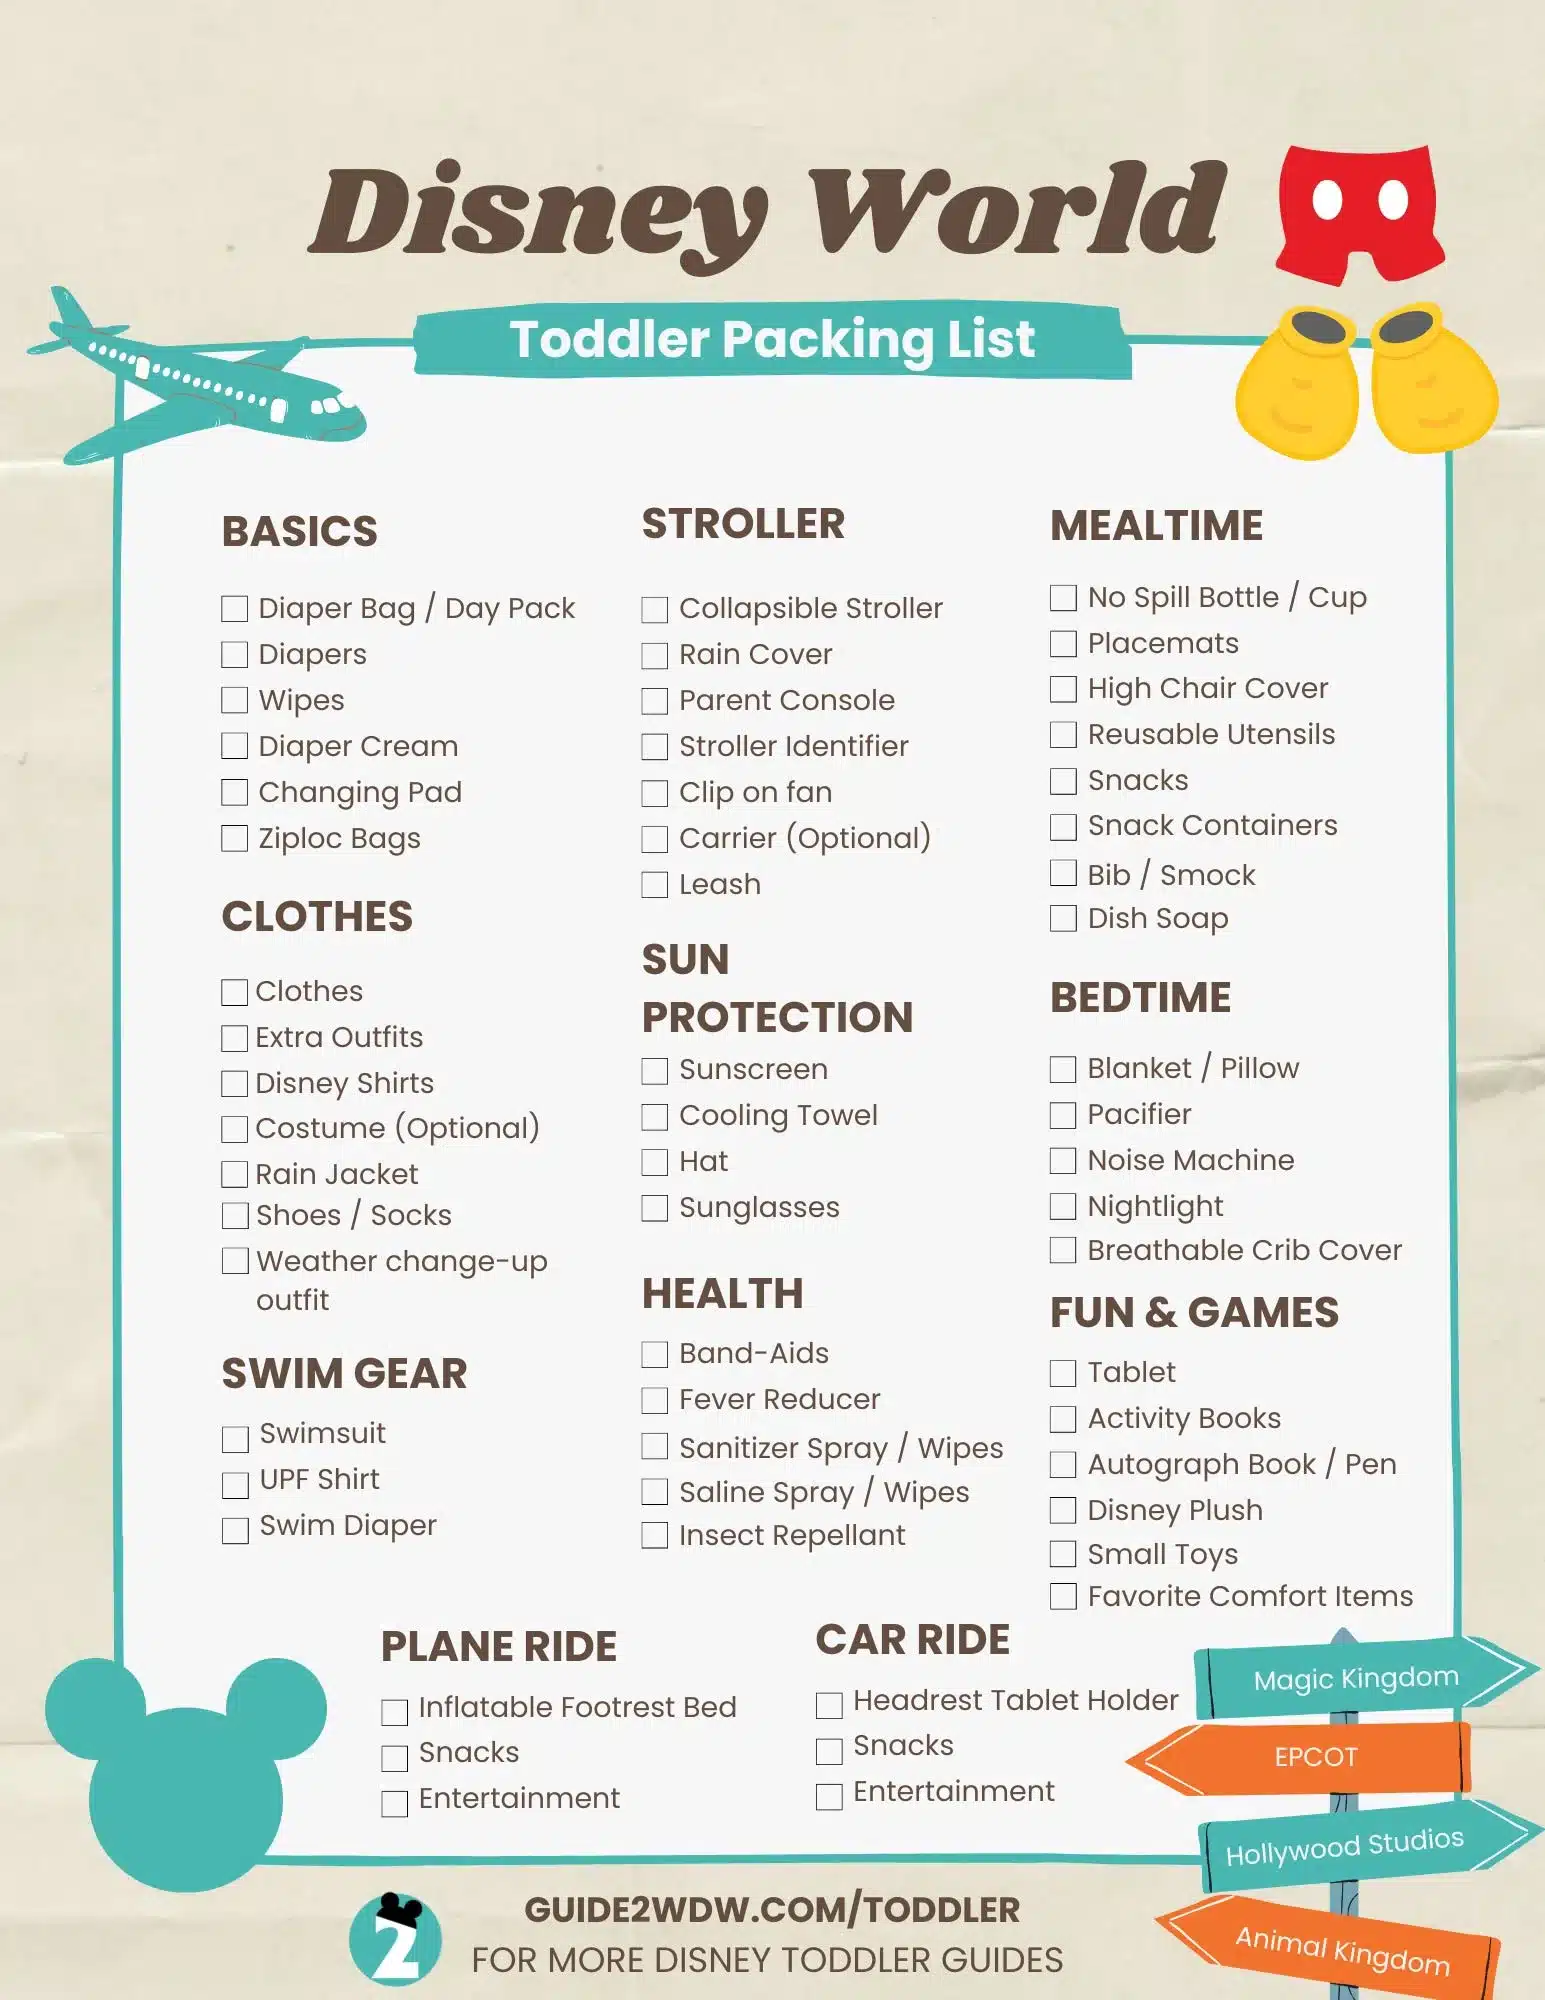 Guide2WDW Toddler Packing List for Disney World